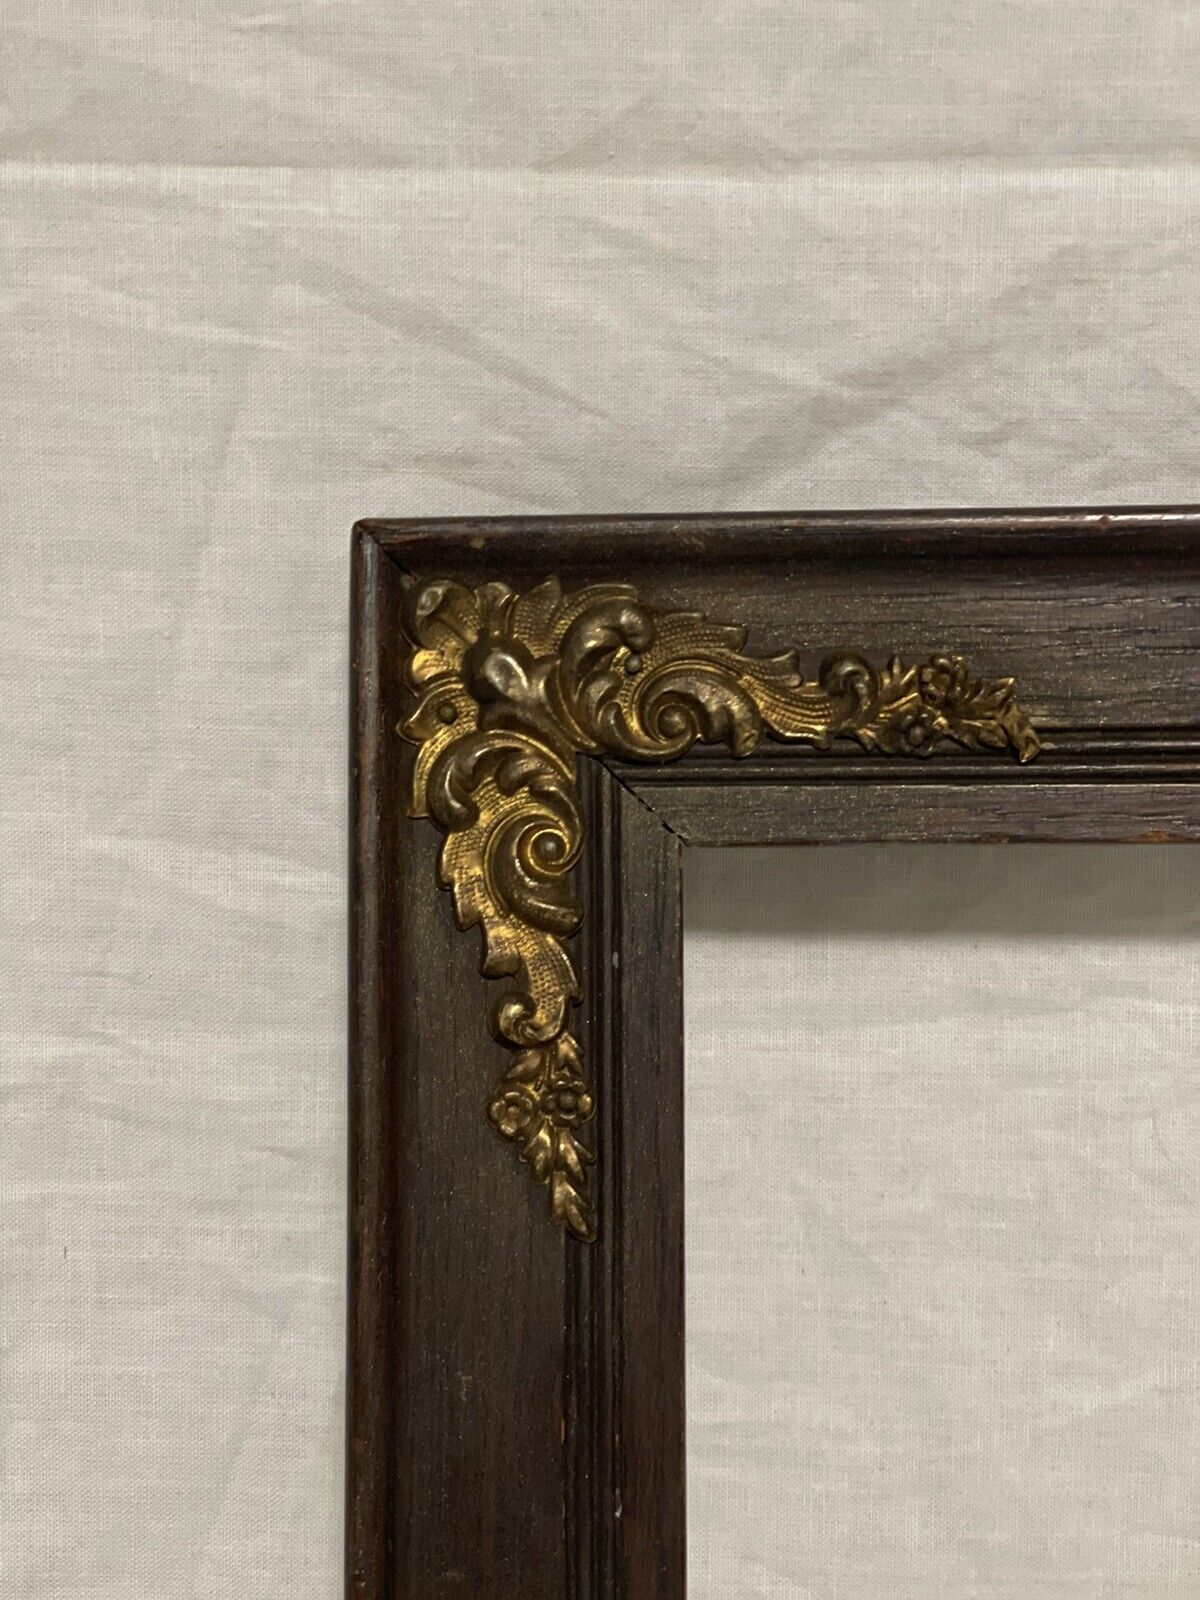 ANTIQUE FITs 10”x12” ARTS & CRAFTS AESTHETIC VICTORIAN TIGER OAK PICTURE FRAME